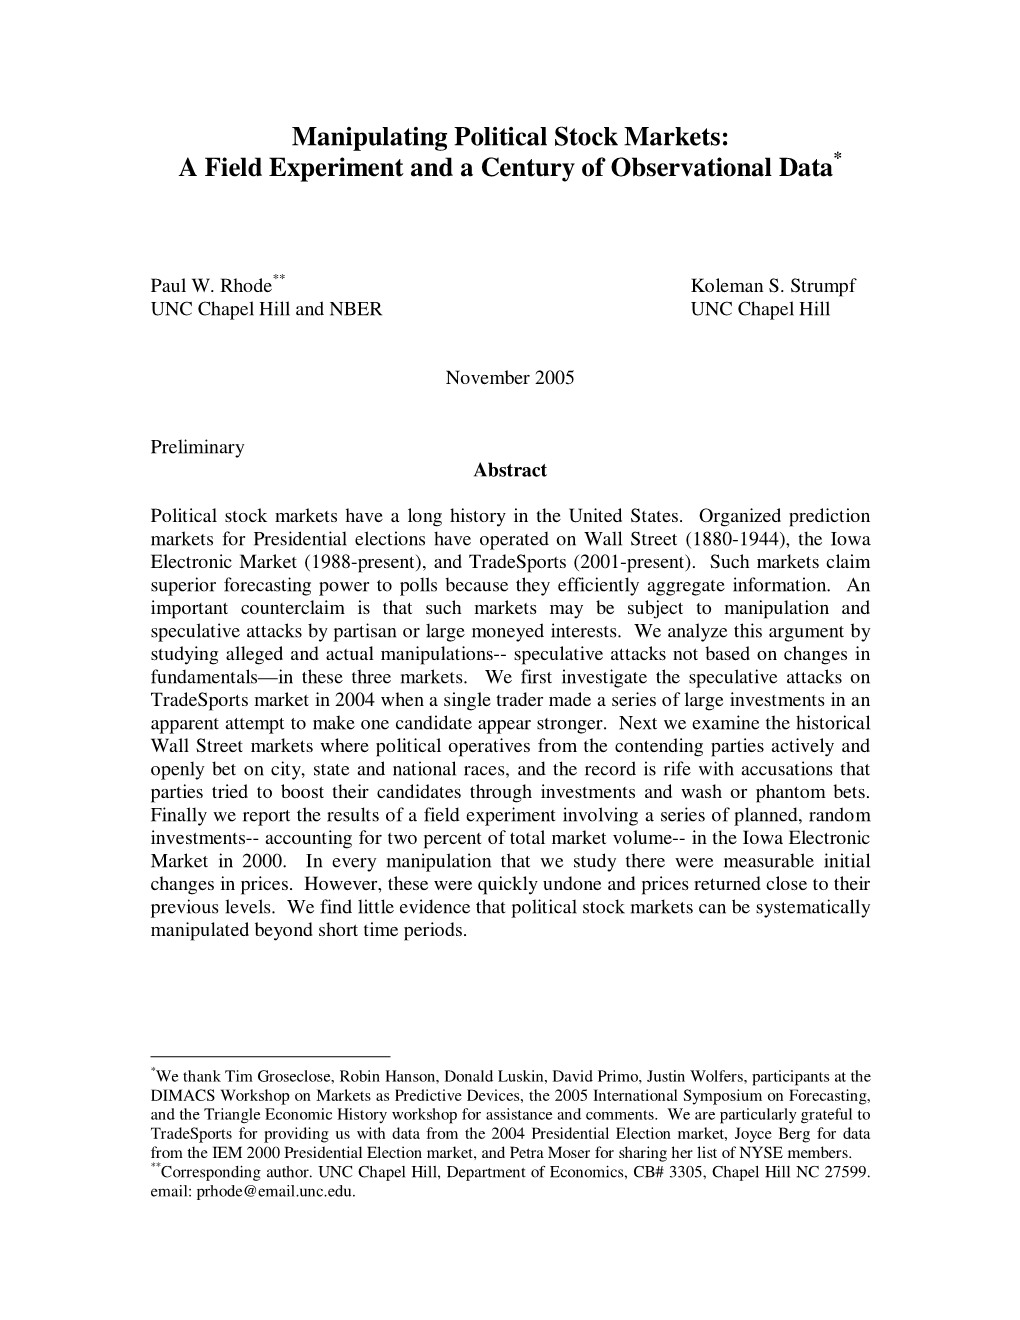 Manipulating Political Stock Markets: * a Field Experiment and a Century of Observational Data